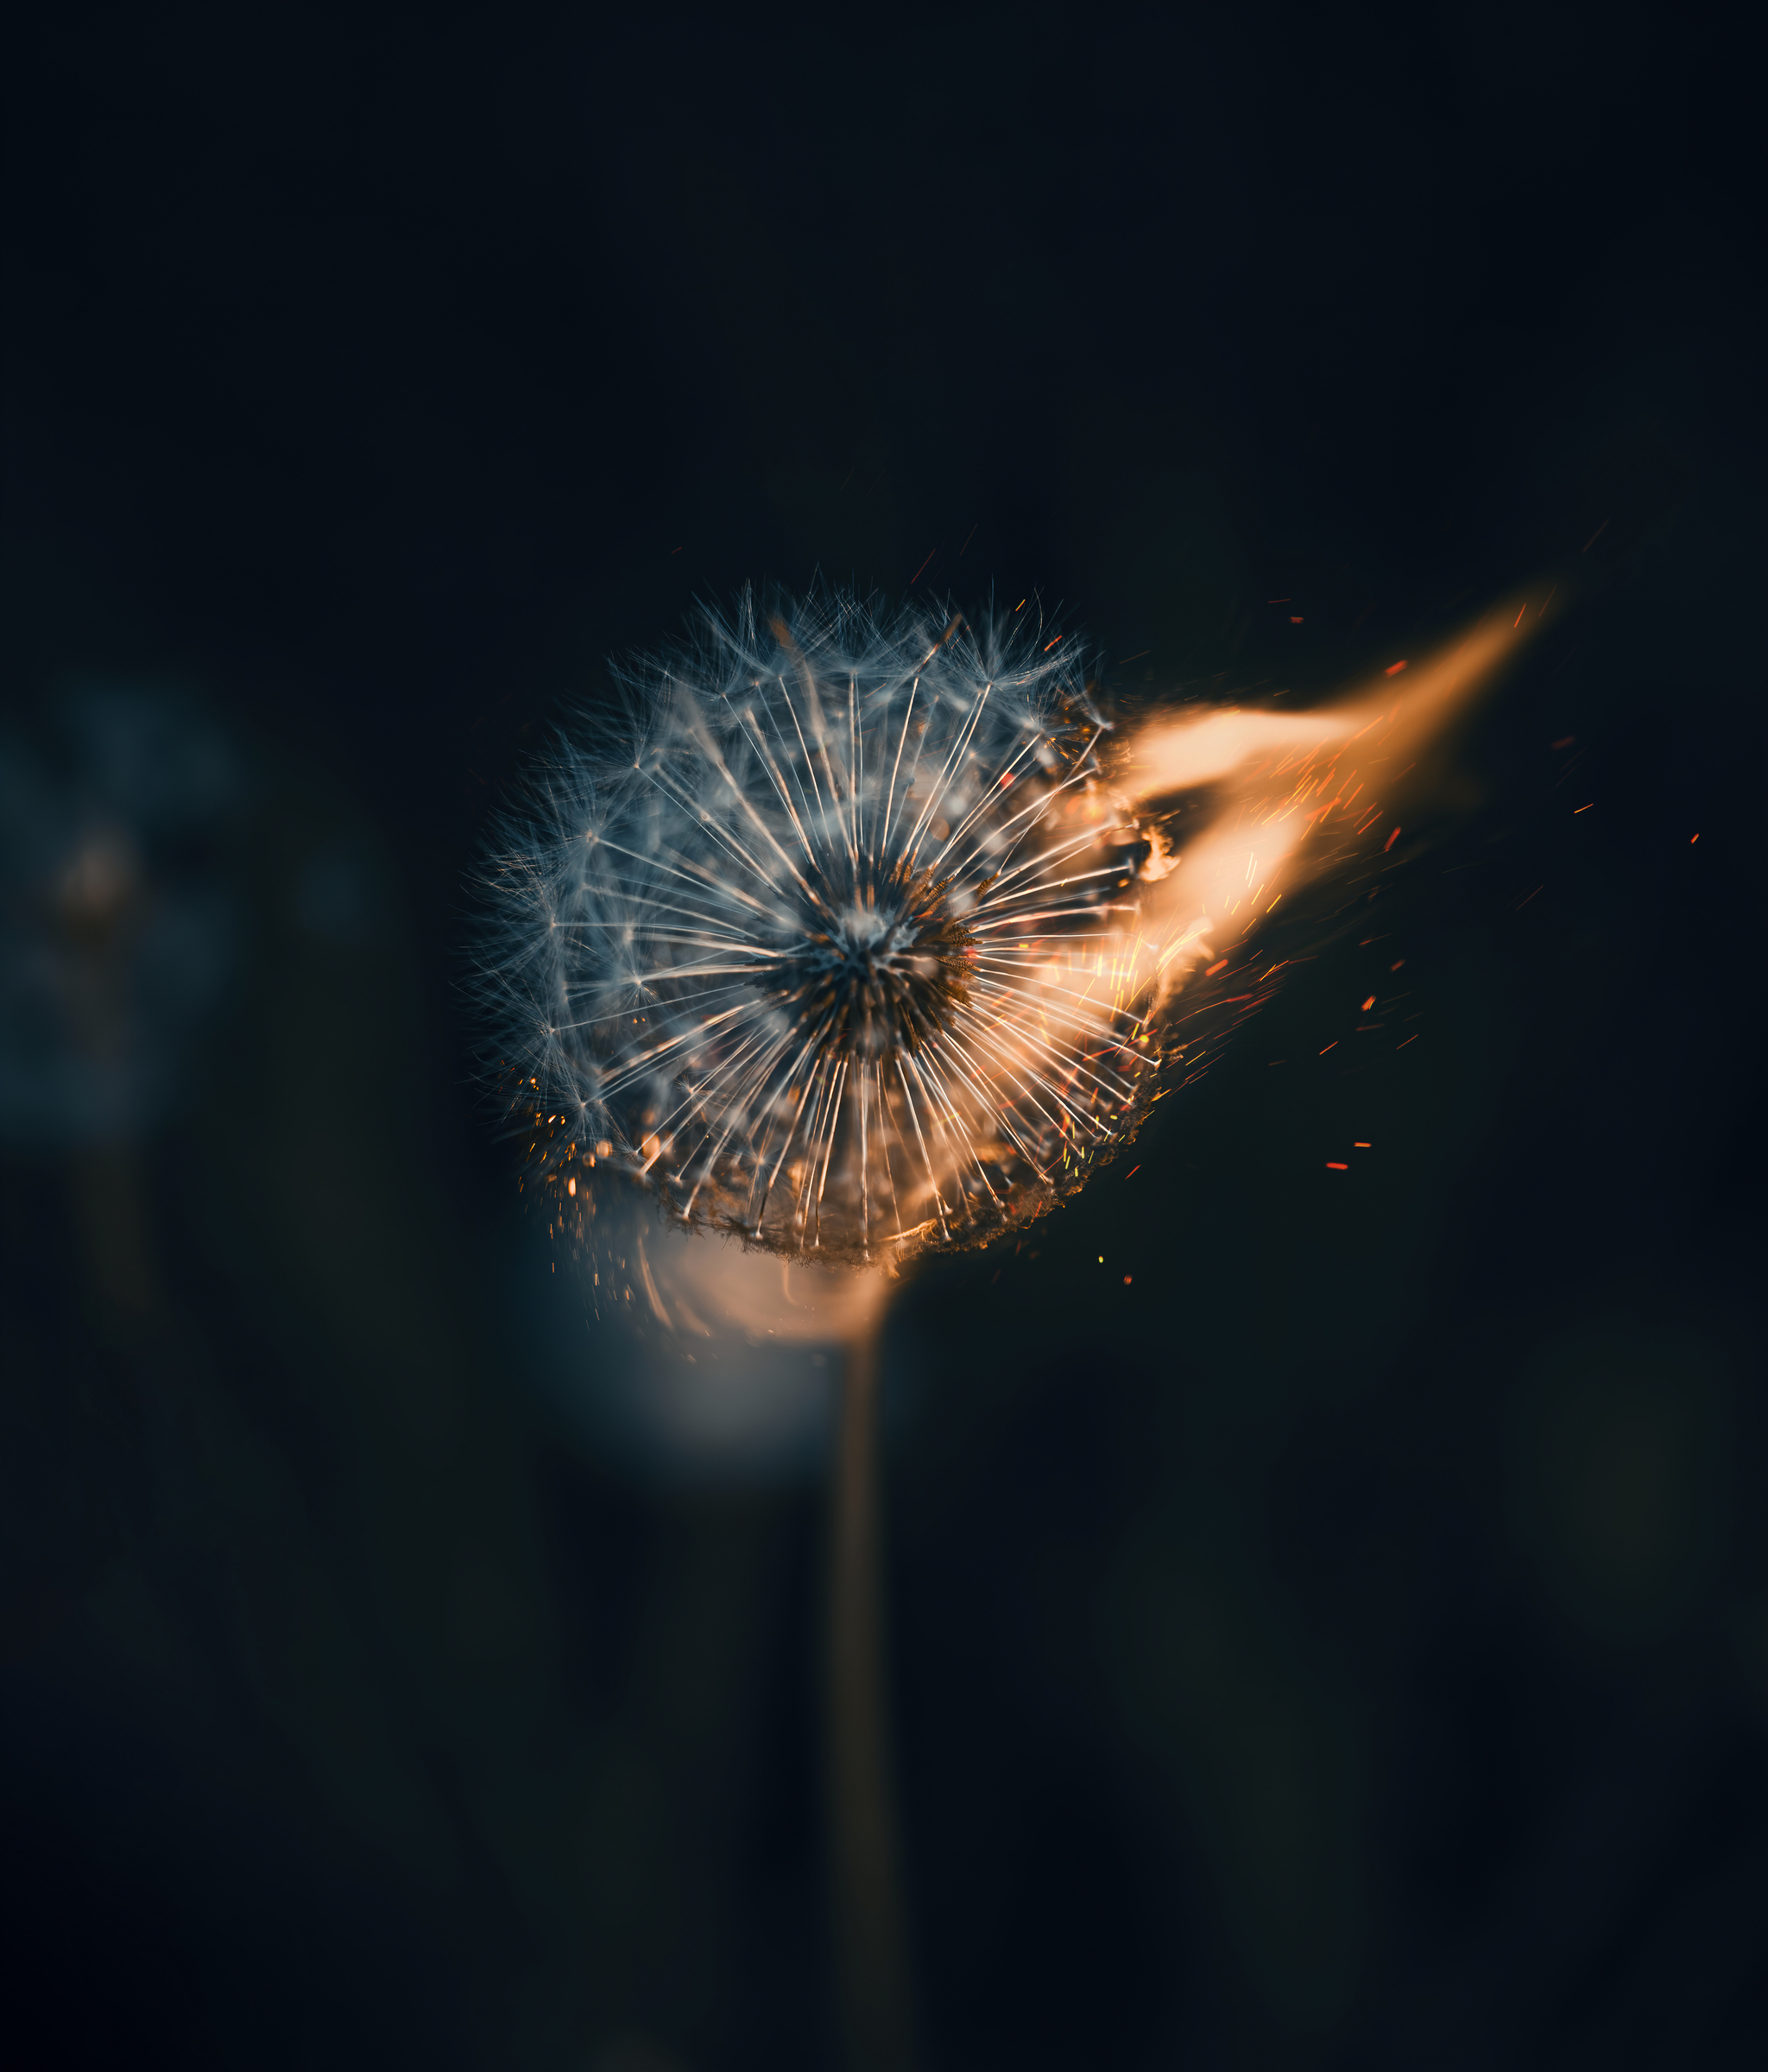 I brought some photos from the forest - My, Nature, Forest, wildlife, Hike, The photo, Dandelion, Fire, Plants, Wallpaper, Nikon, Tourism, Longpost